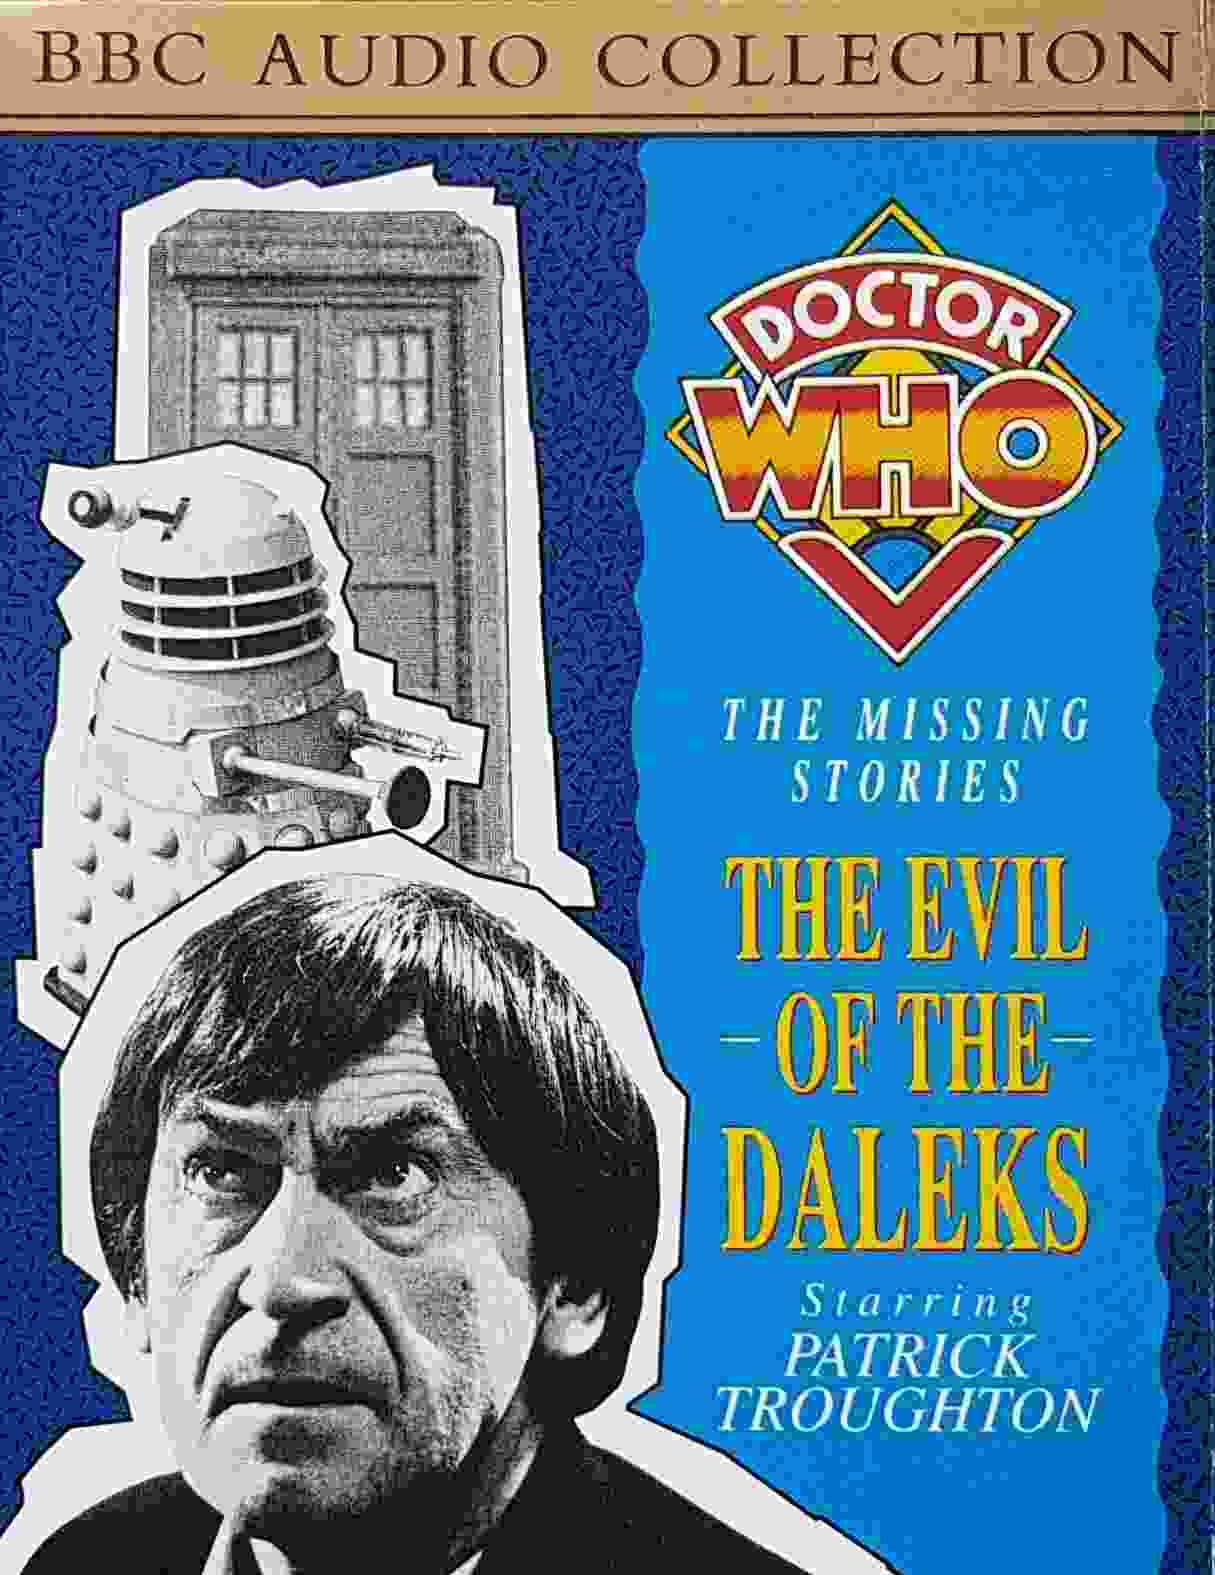 Picture of ZBBC 1303 Doctor Who - The evil of the Daleks by artist David Whitaker from the BBC records and Tapes library